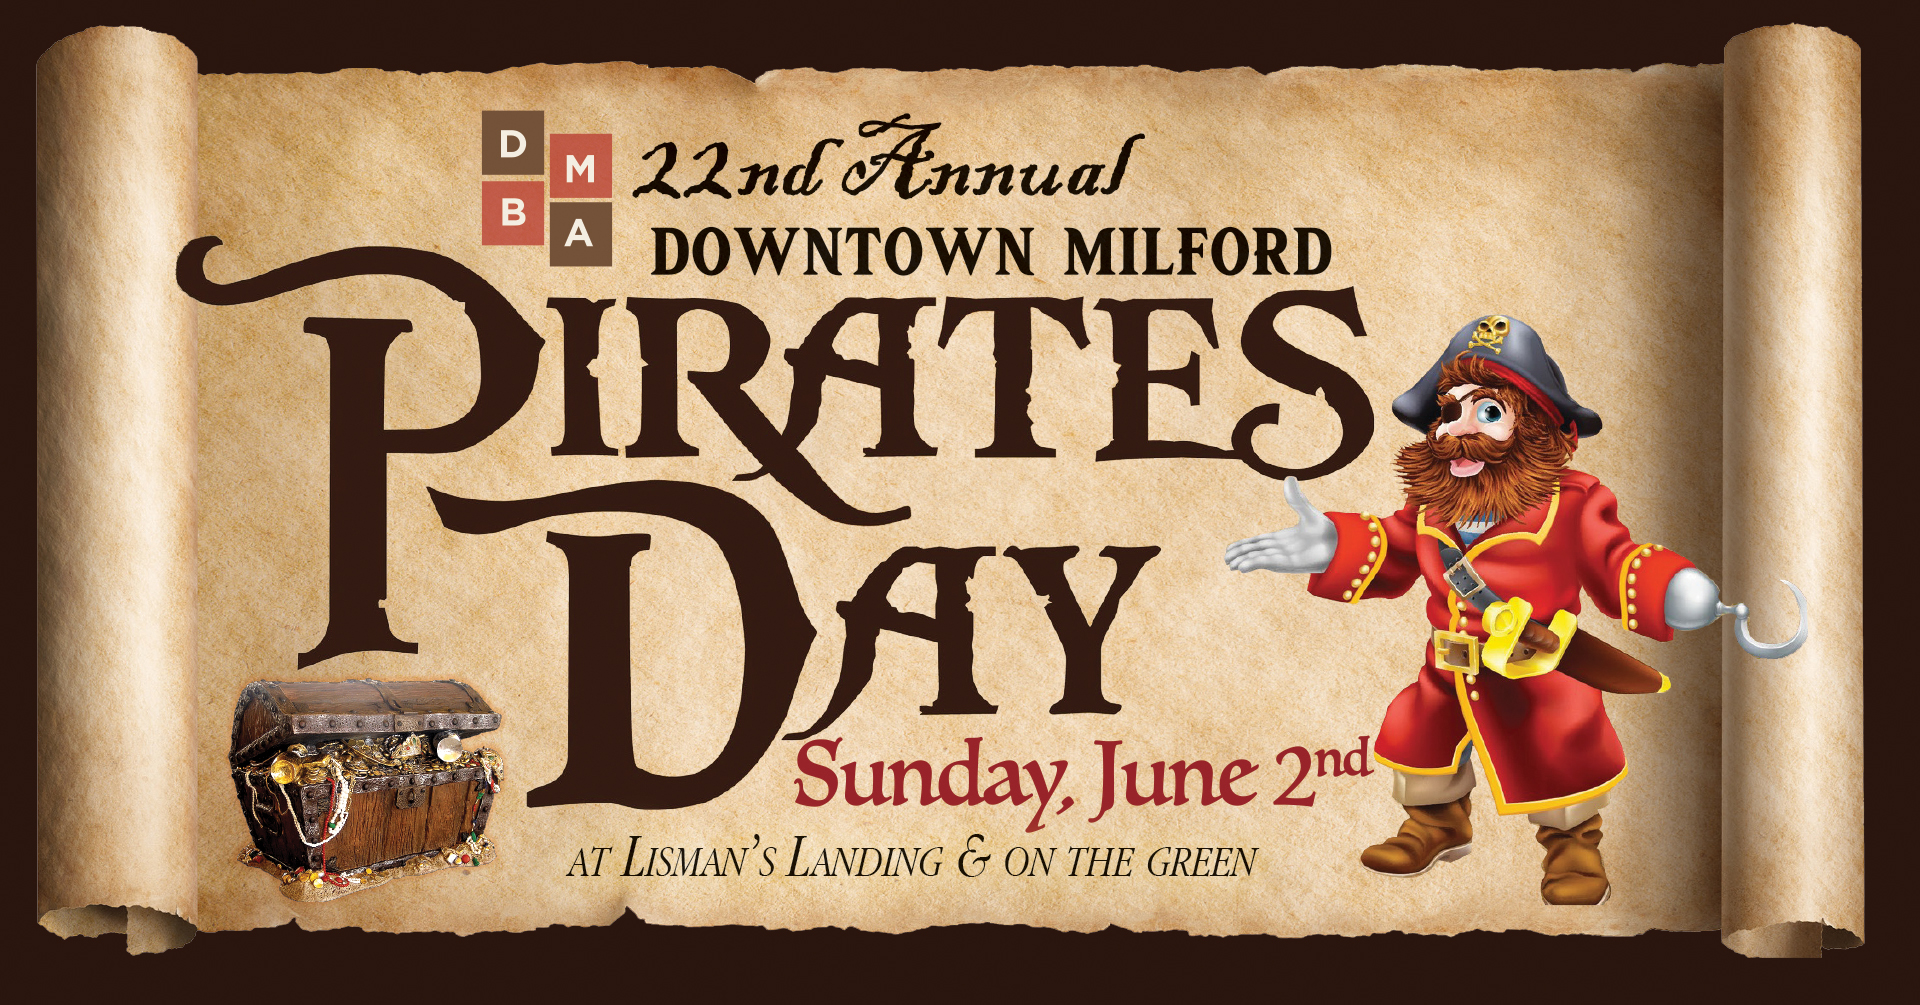 Annual Pirate's Day Downtown Milford Lisman's Landing